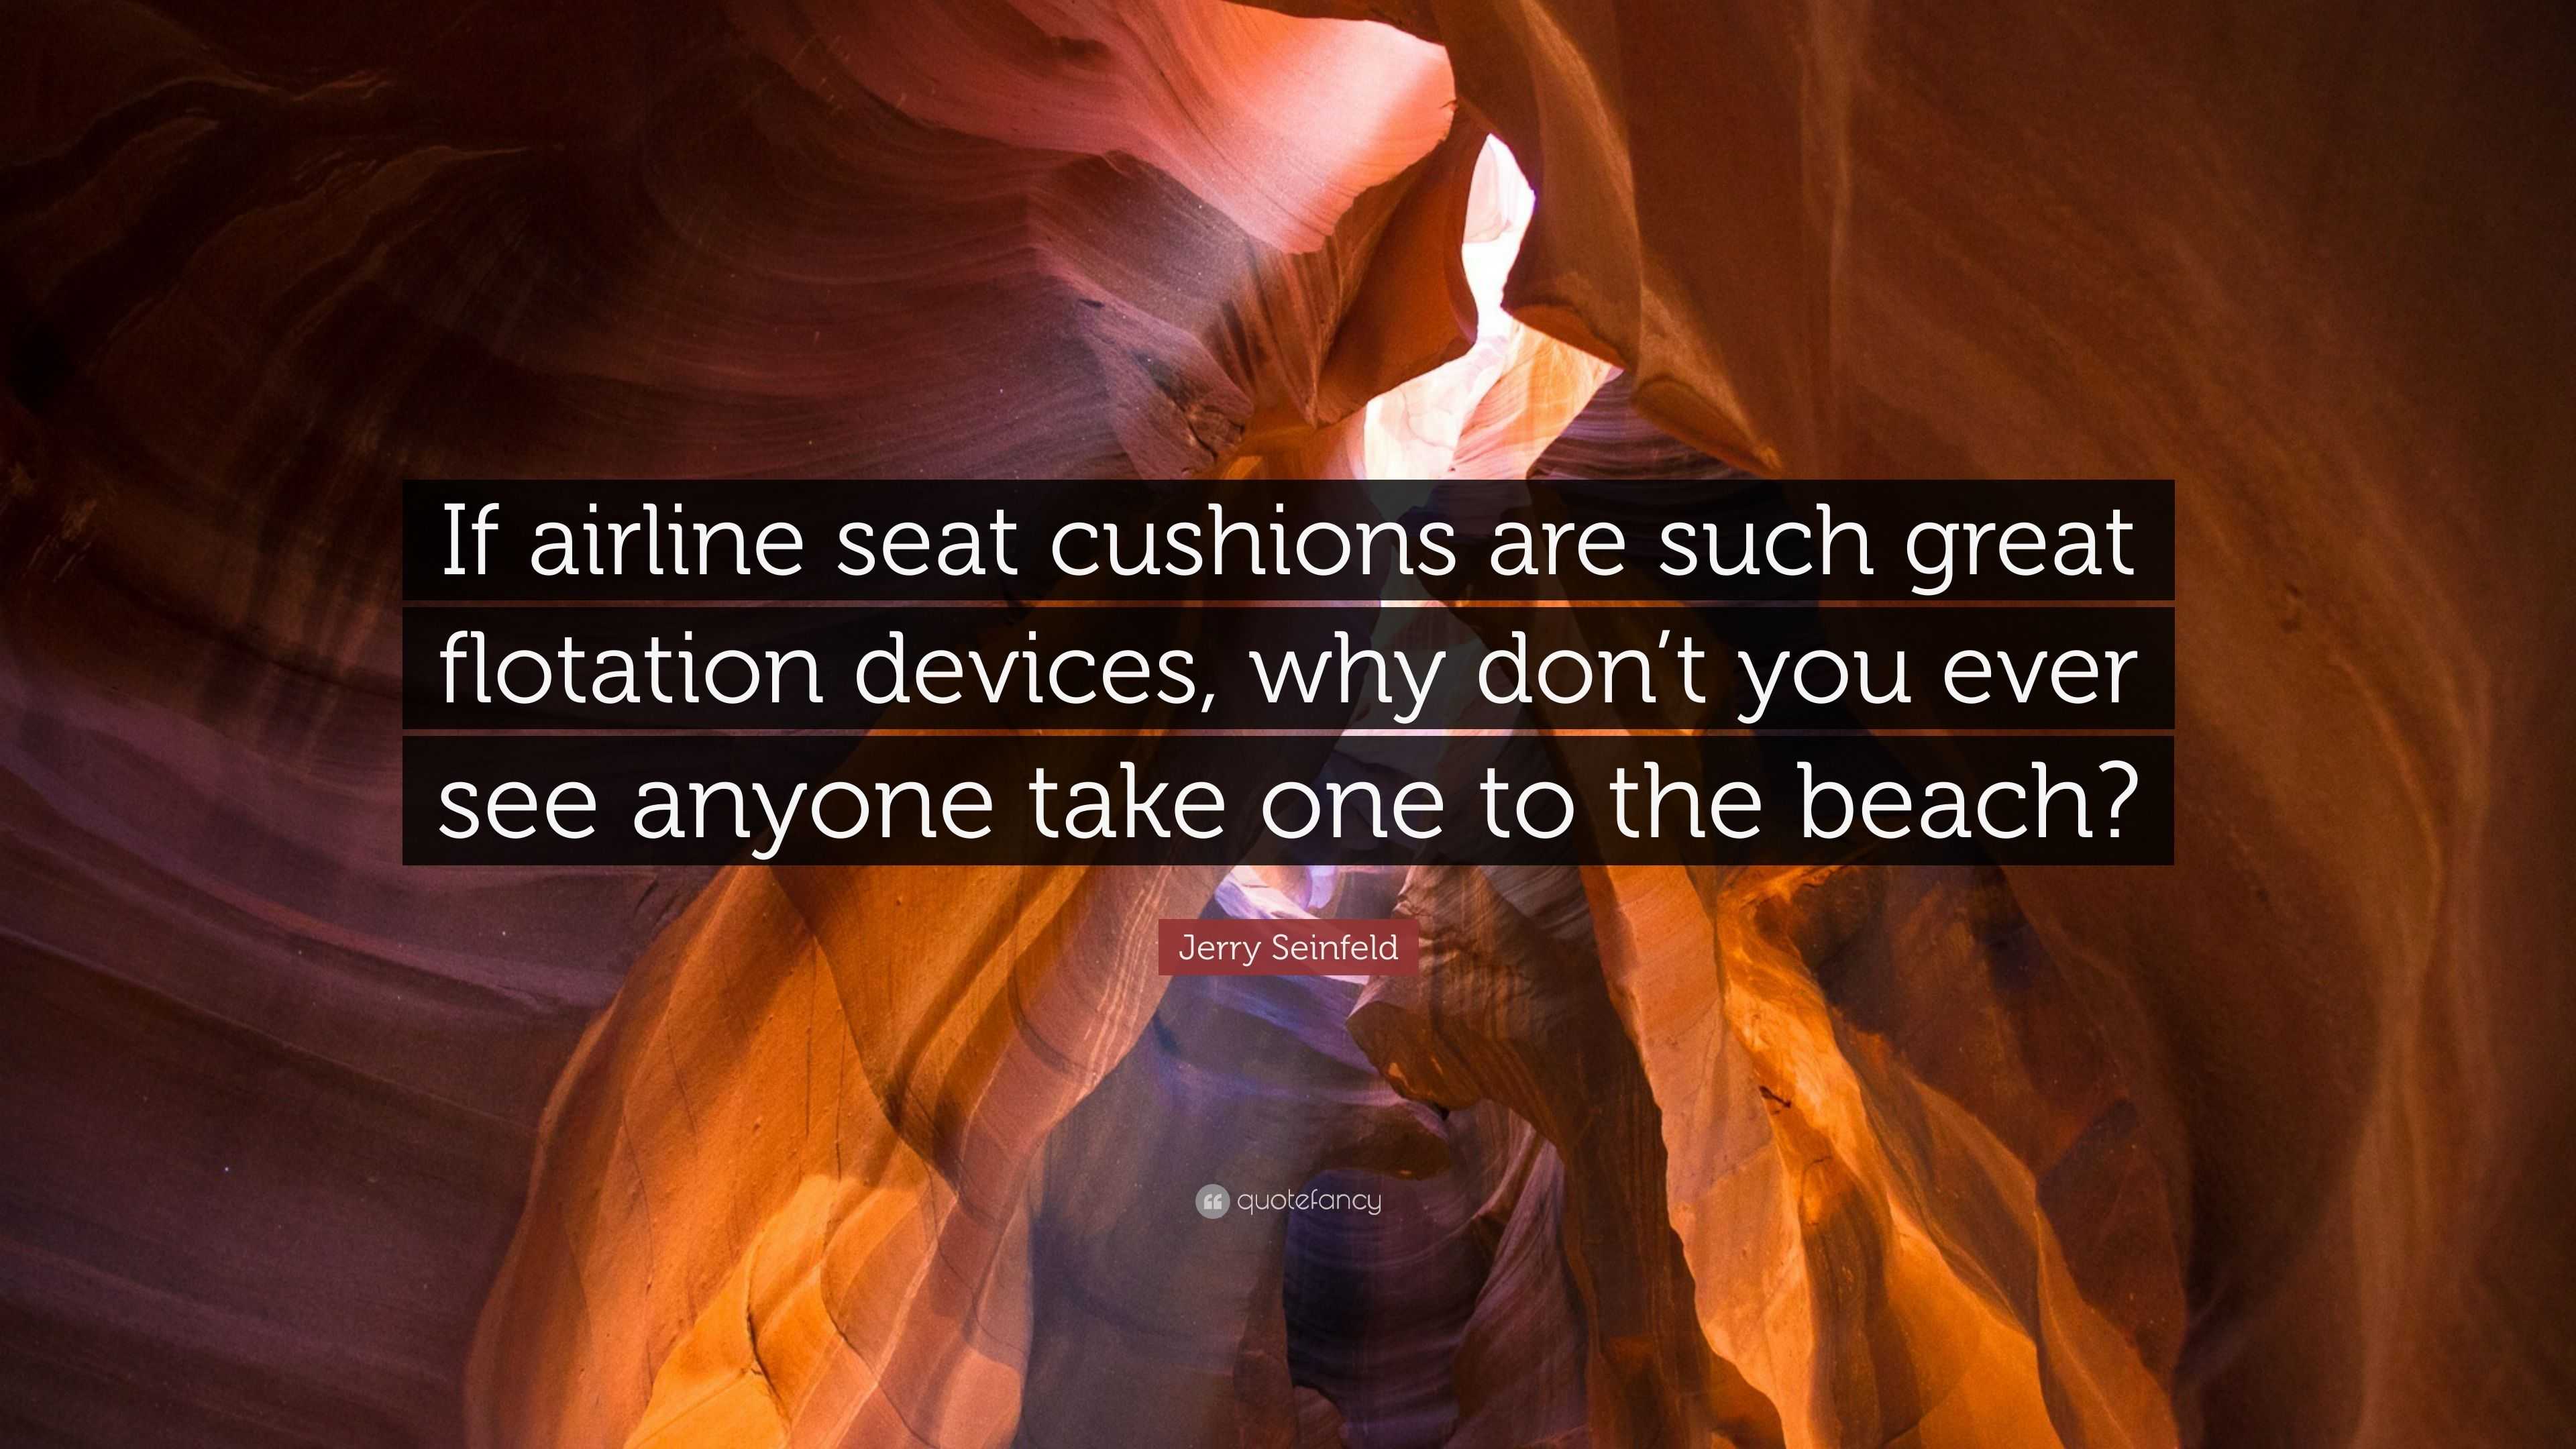 Jerry Seinfeld quote: If airline seat cushions are such great flotation  devices, why